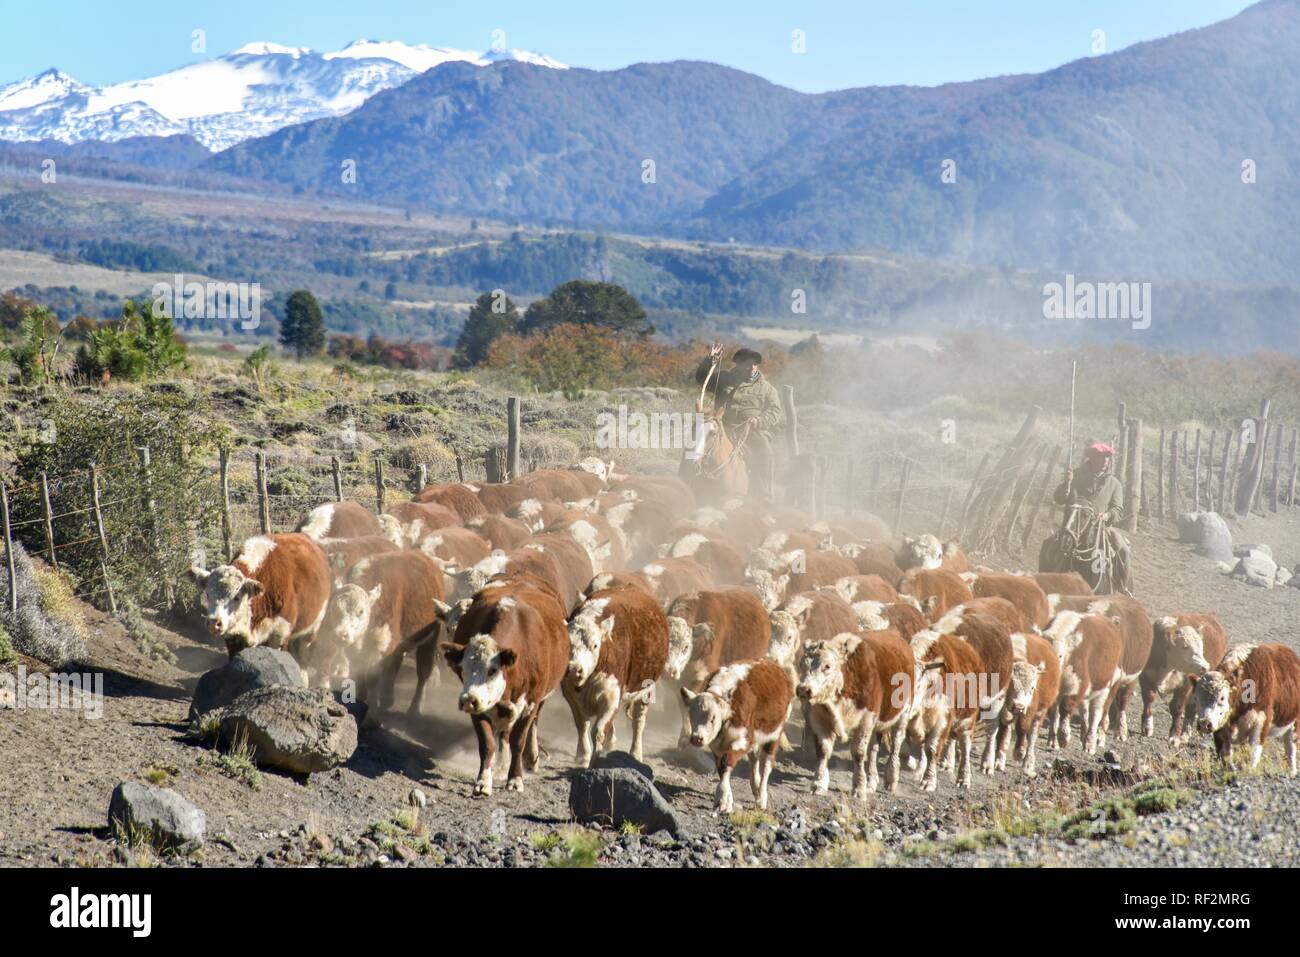 Gauchos on horseback at the cattle drive, Lanin National Park, Patagonia, Argentina Stock Photo